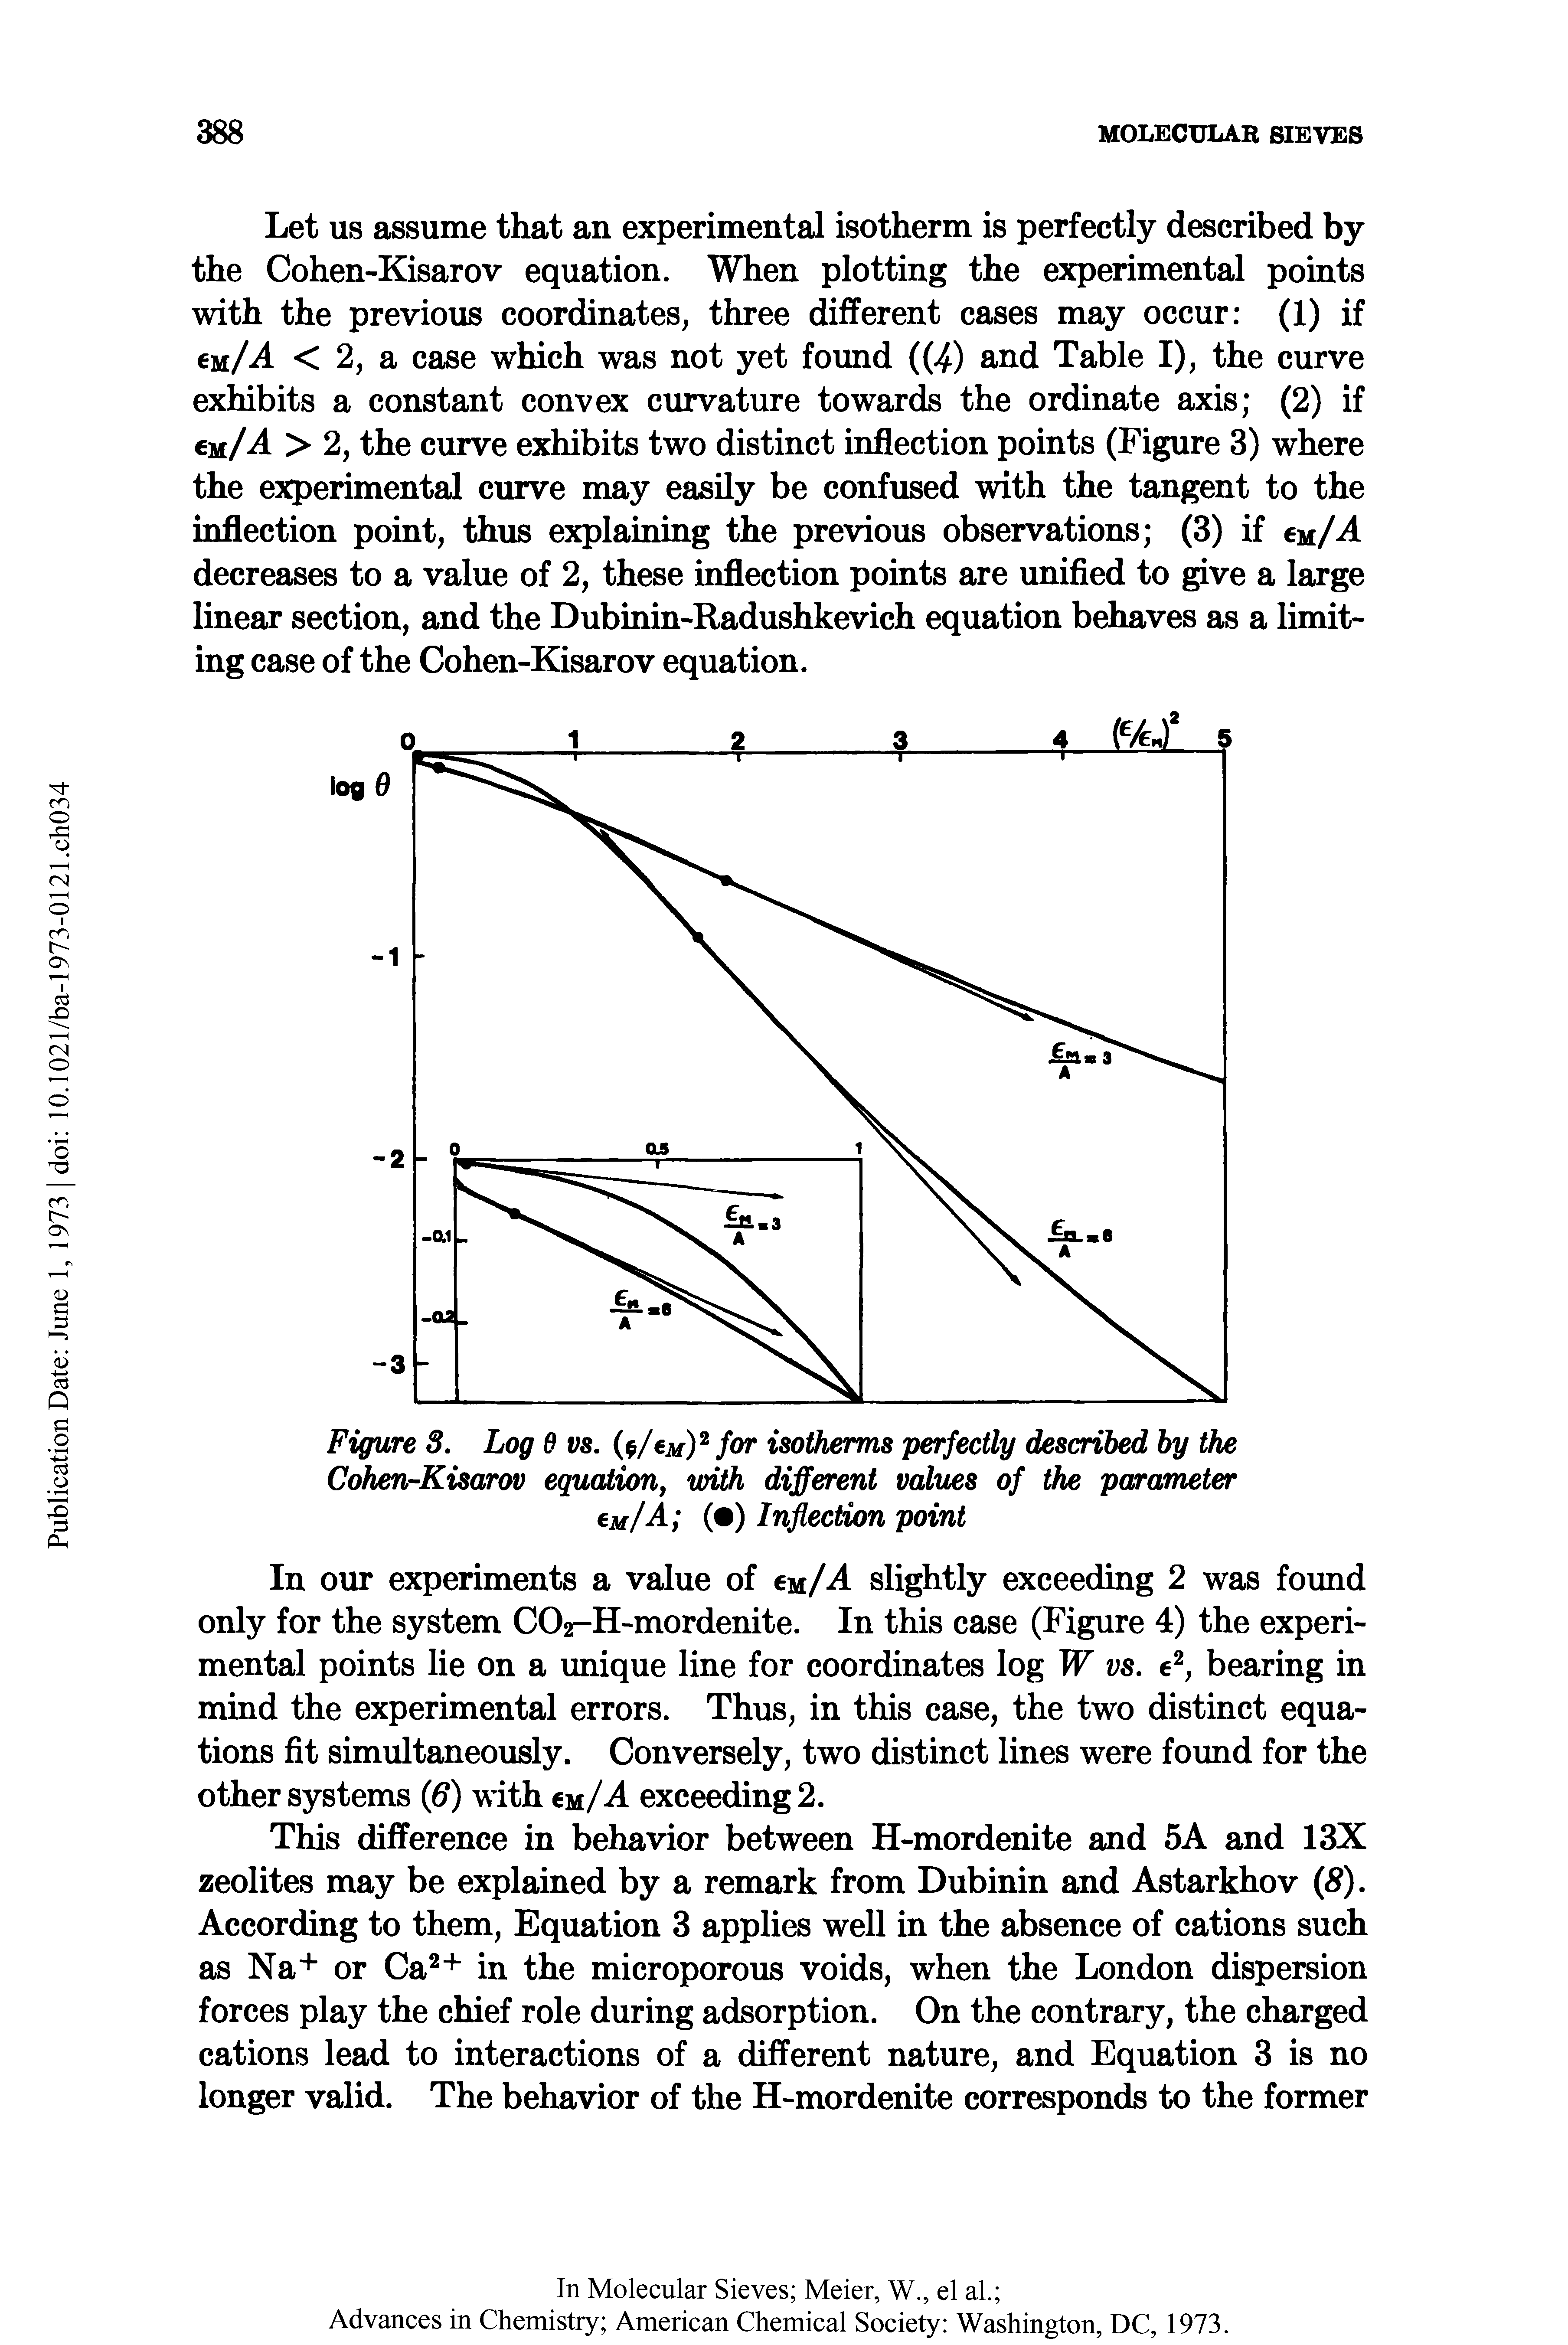 Figure 8. Log 6 vs. ( /eM)2 for isotherms perfectly described by the Cohen-Kisarov equation, with different values of the parameter eM/A ( ) Inflection point...